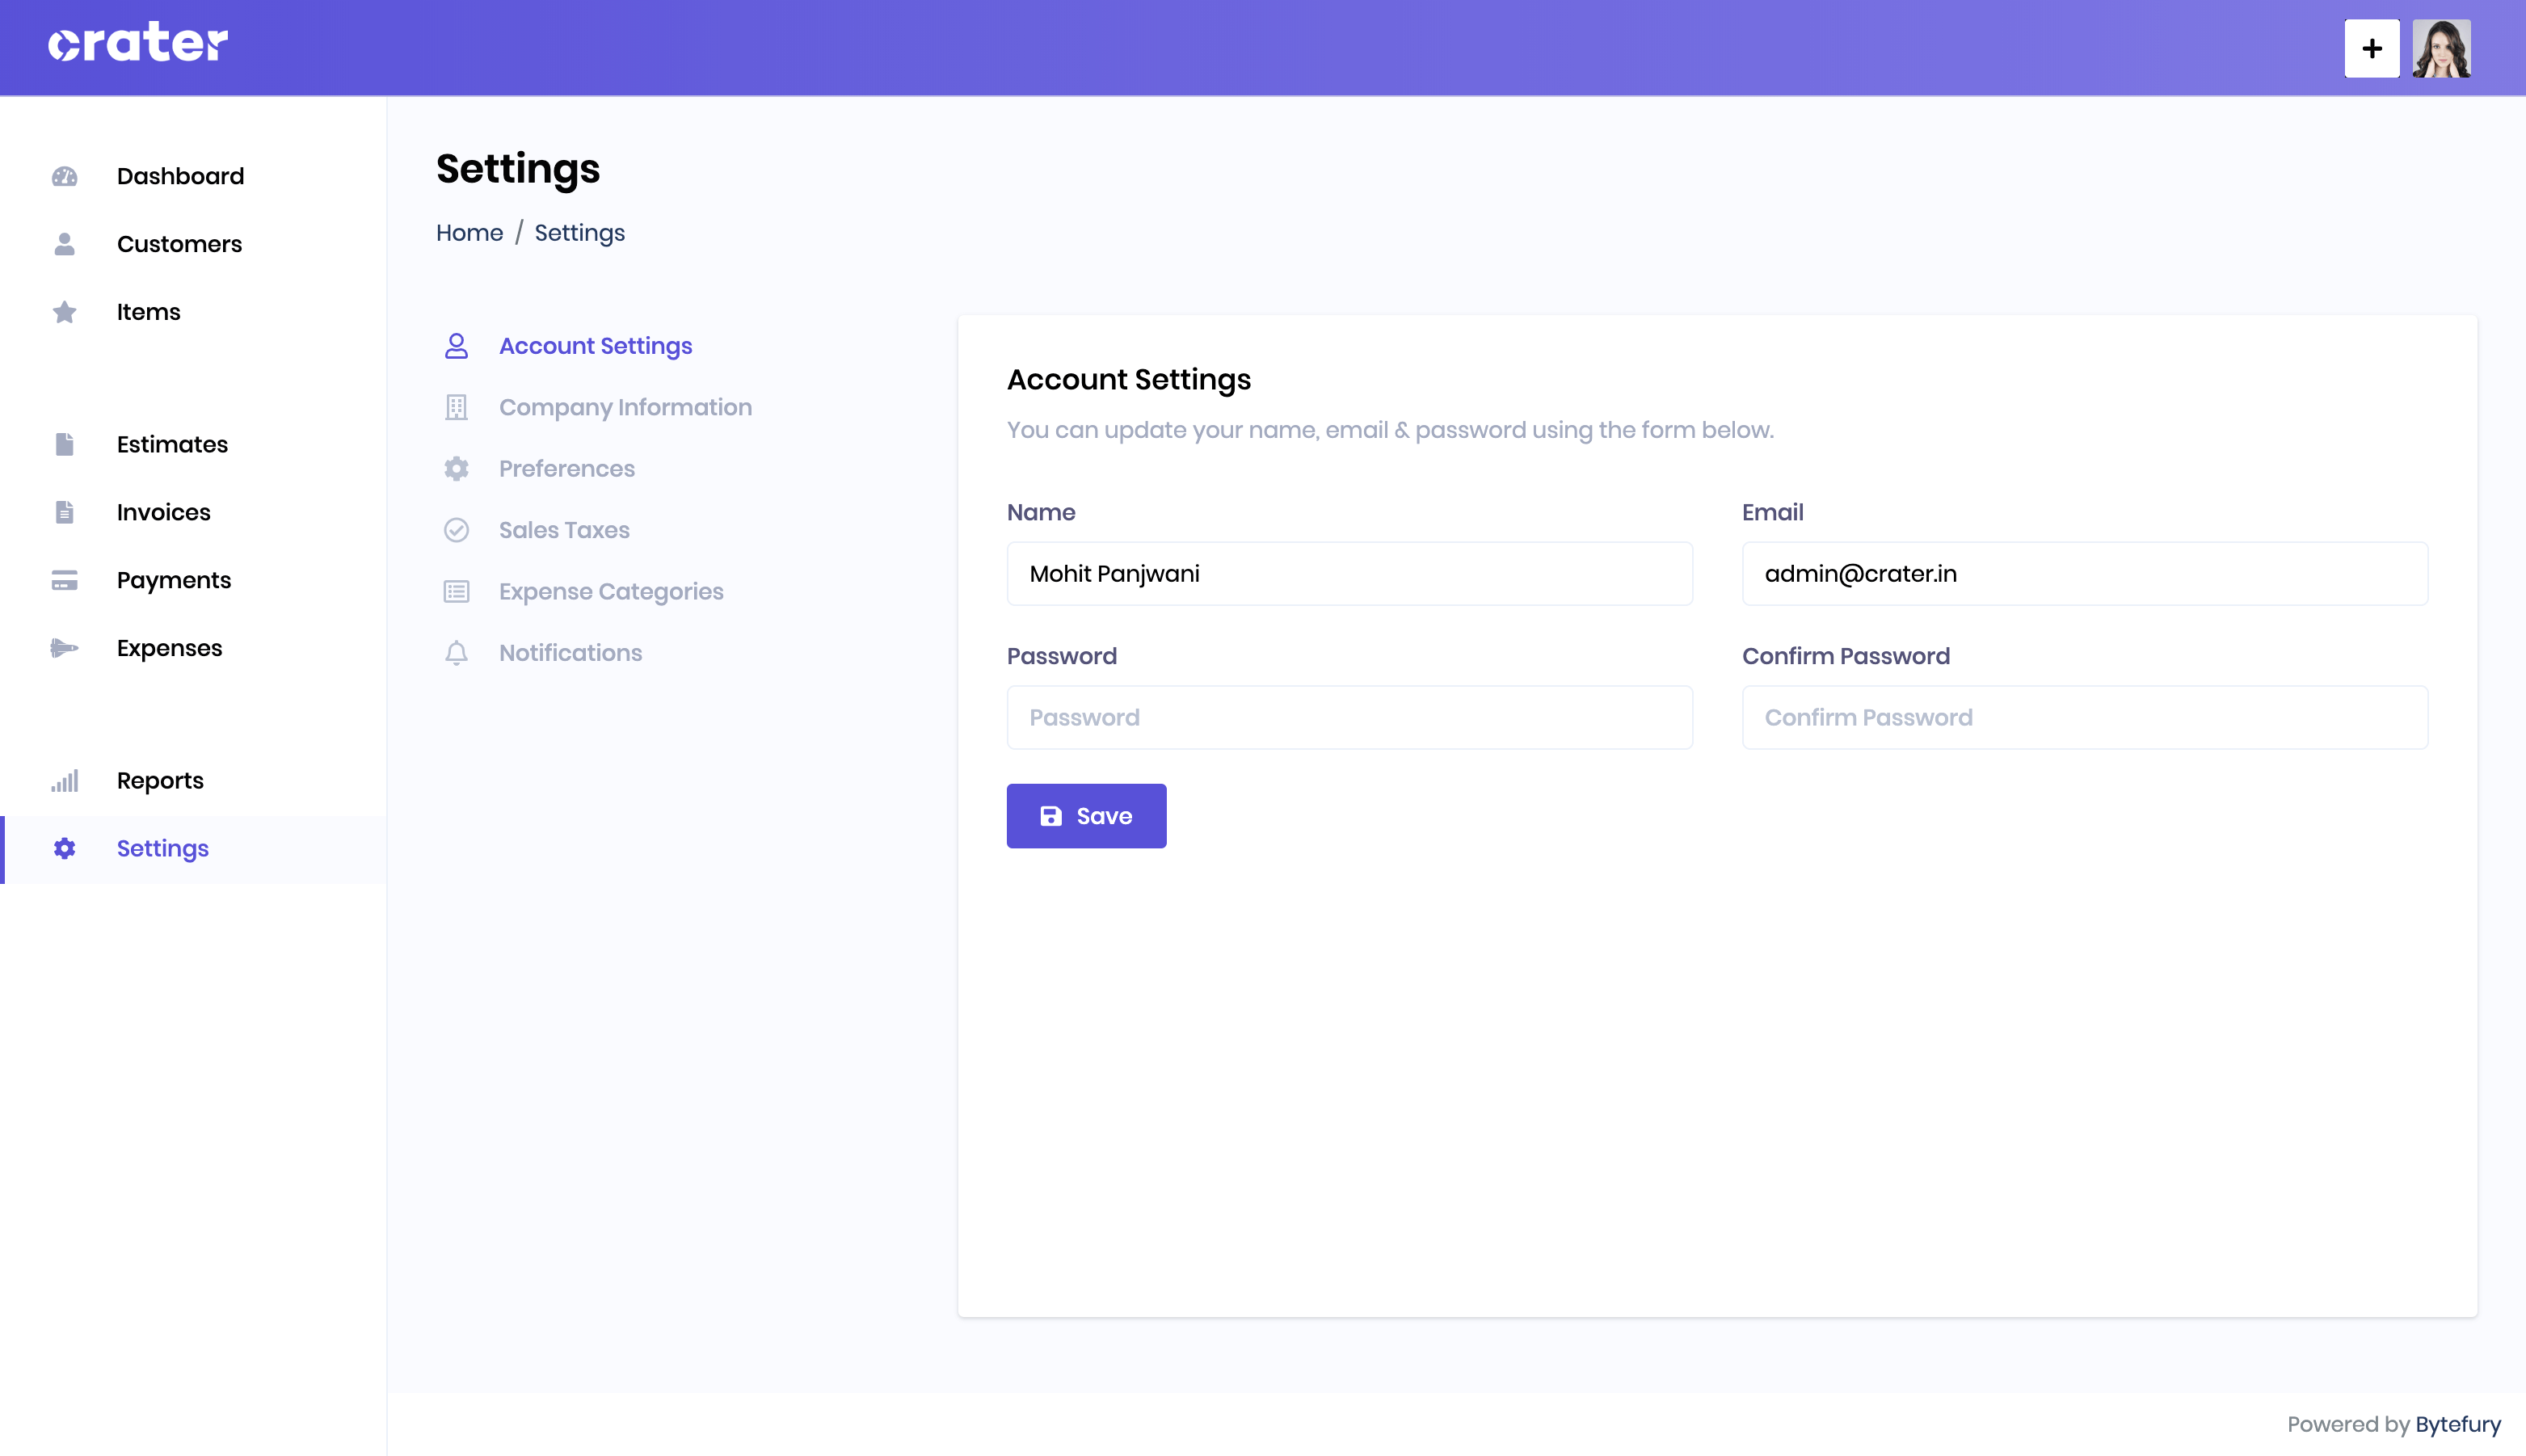 Account Settings Page